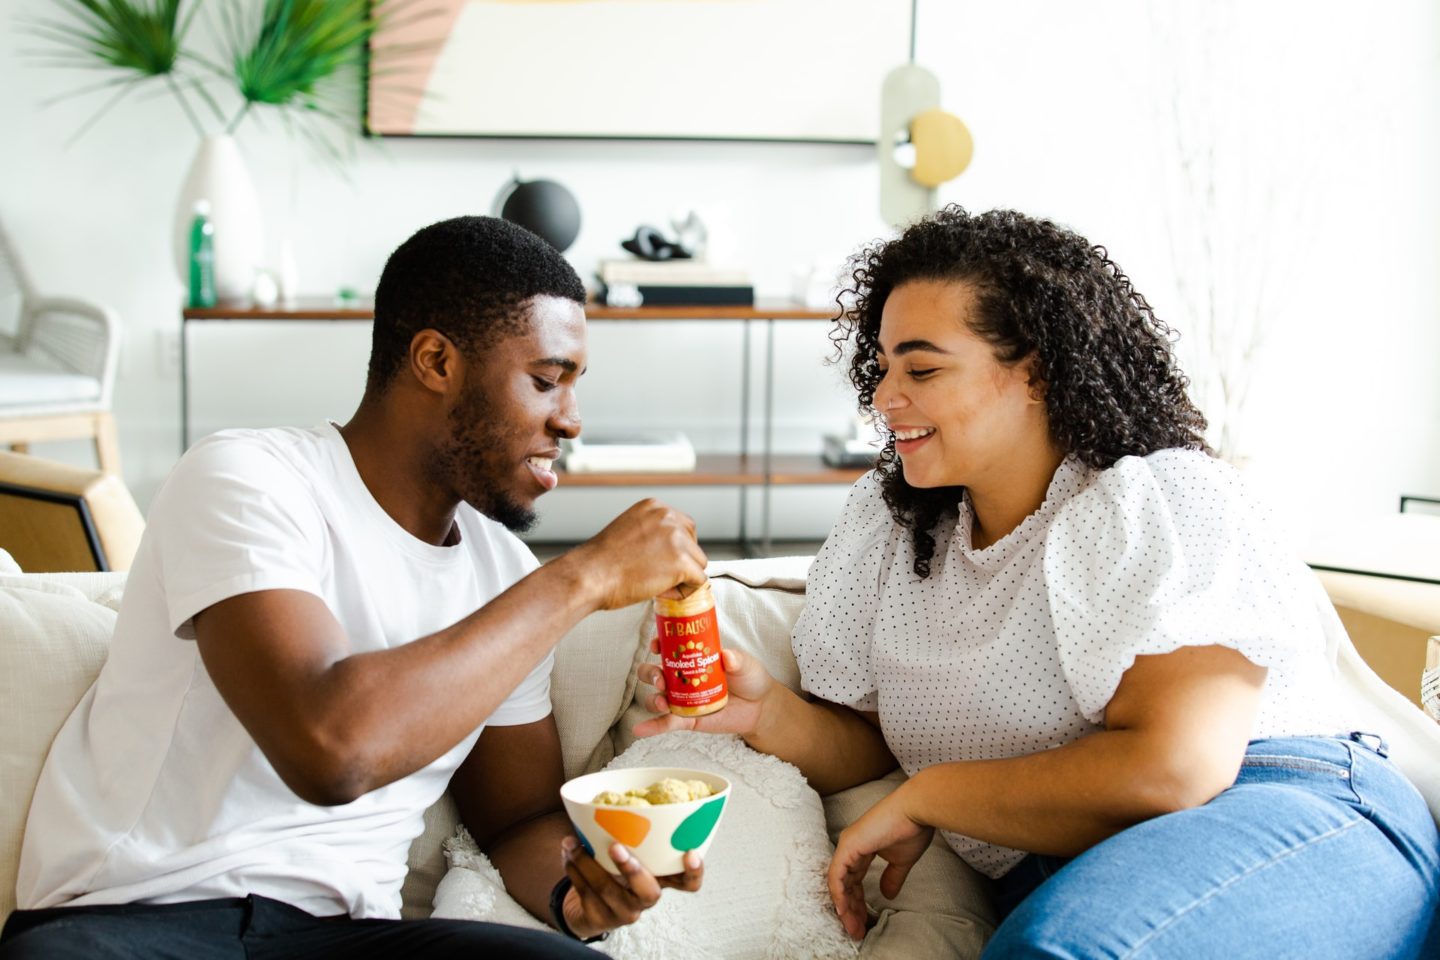 Moving in Together: 9 Signs You’re Ready for the Next Step